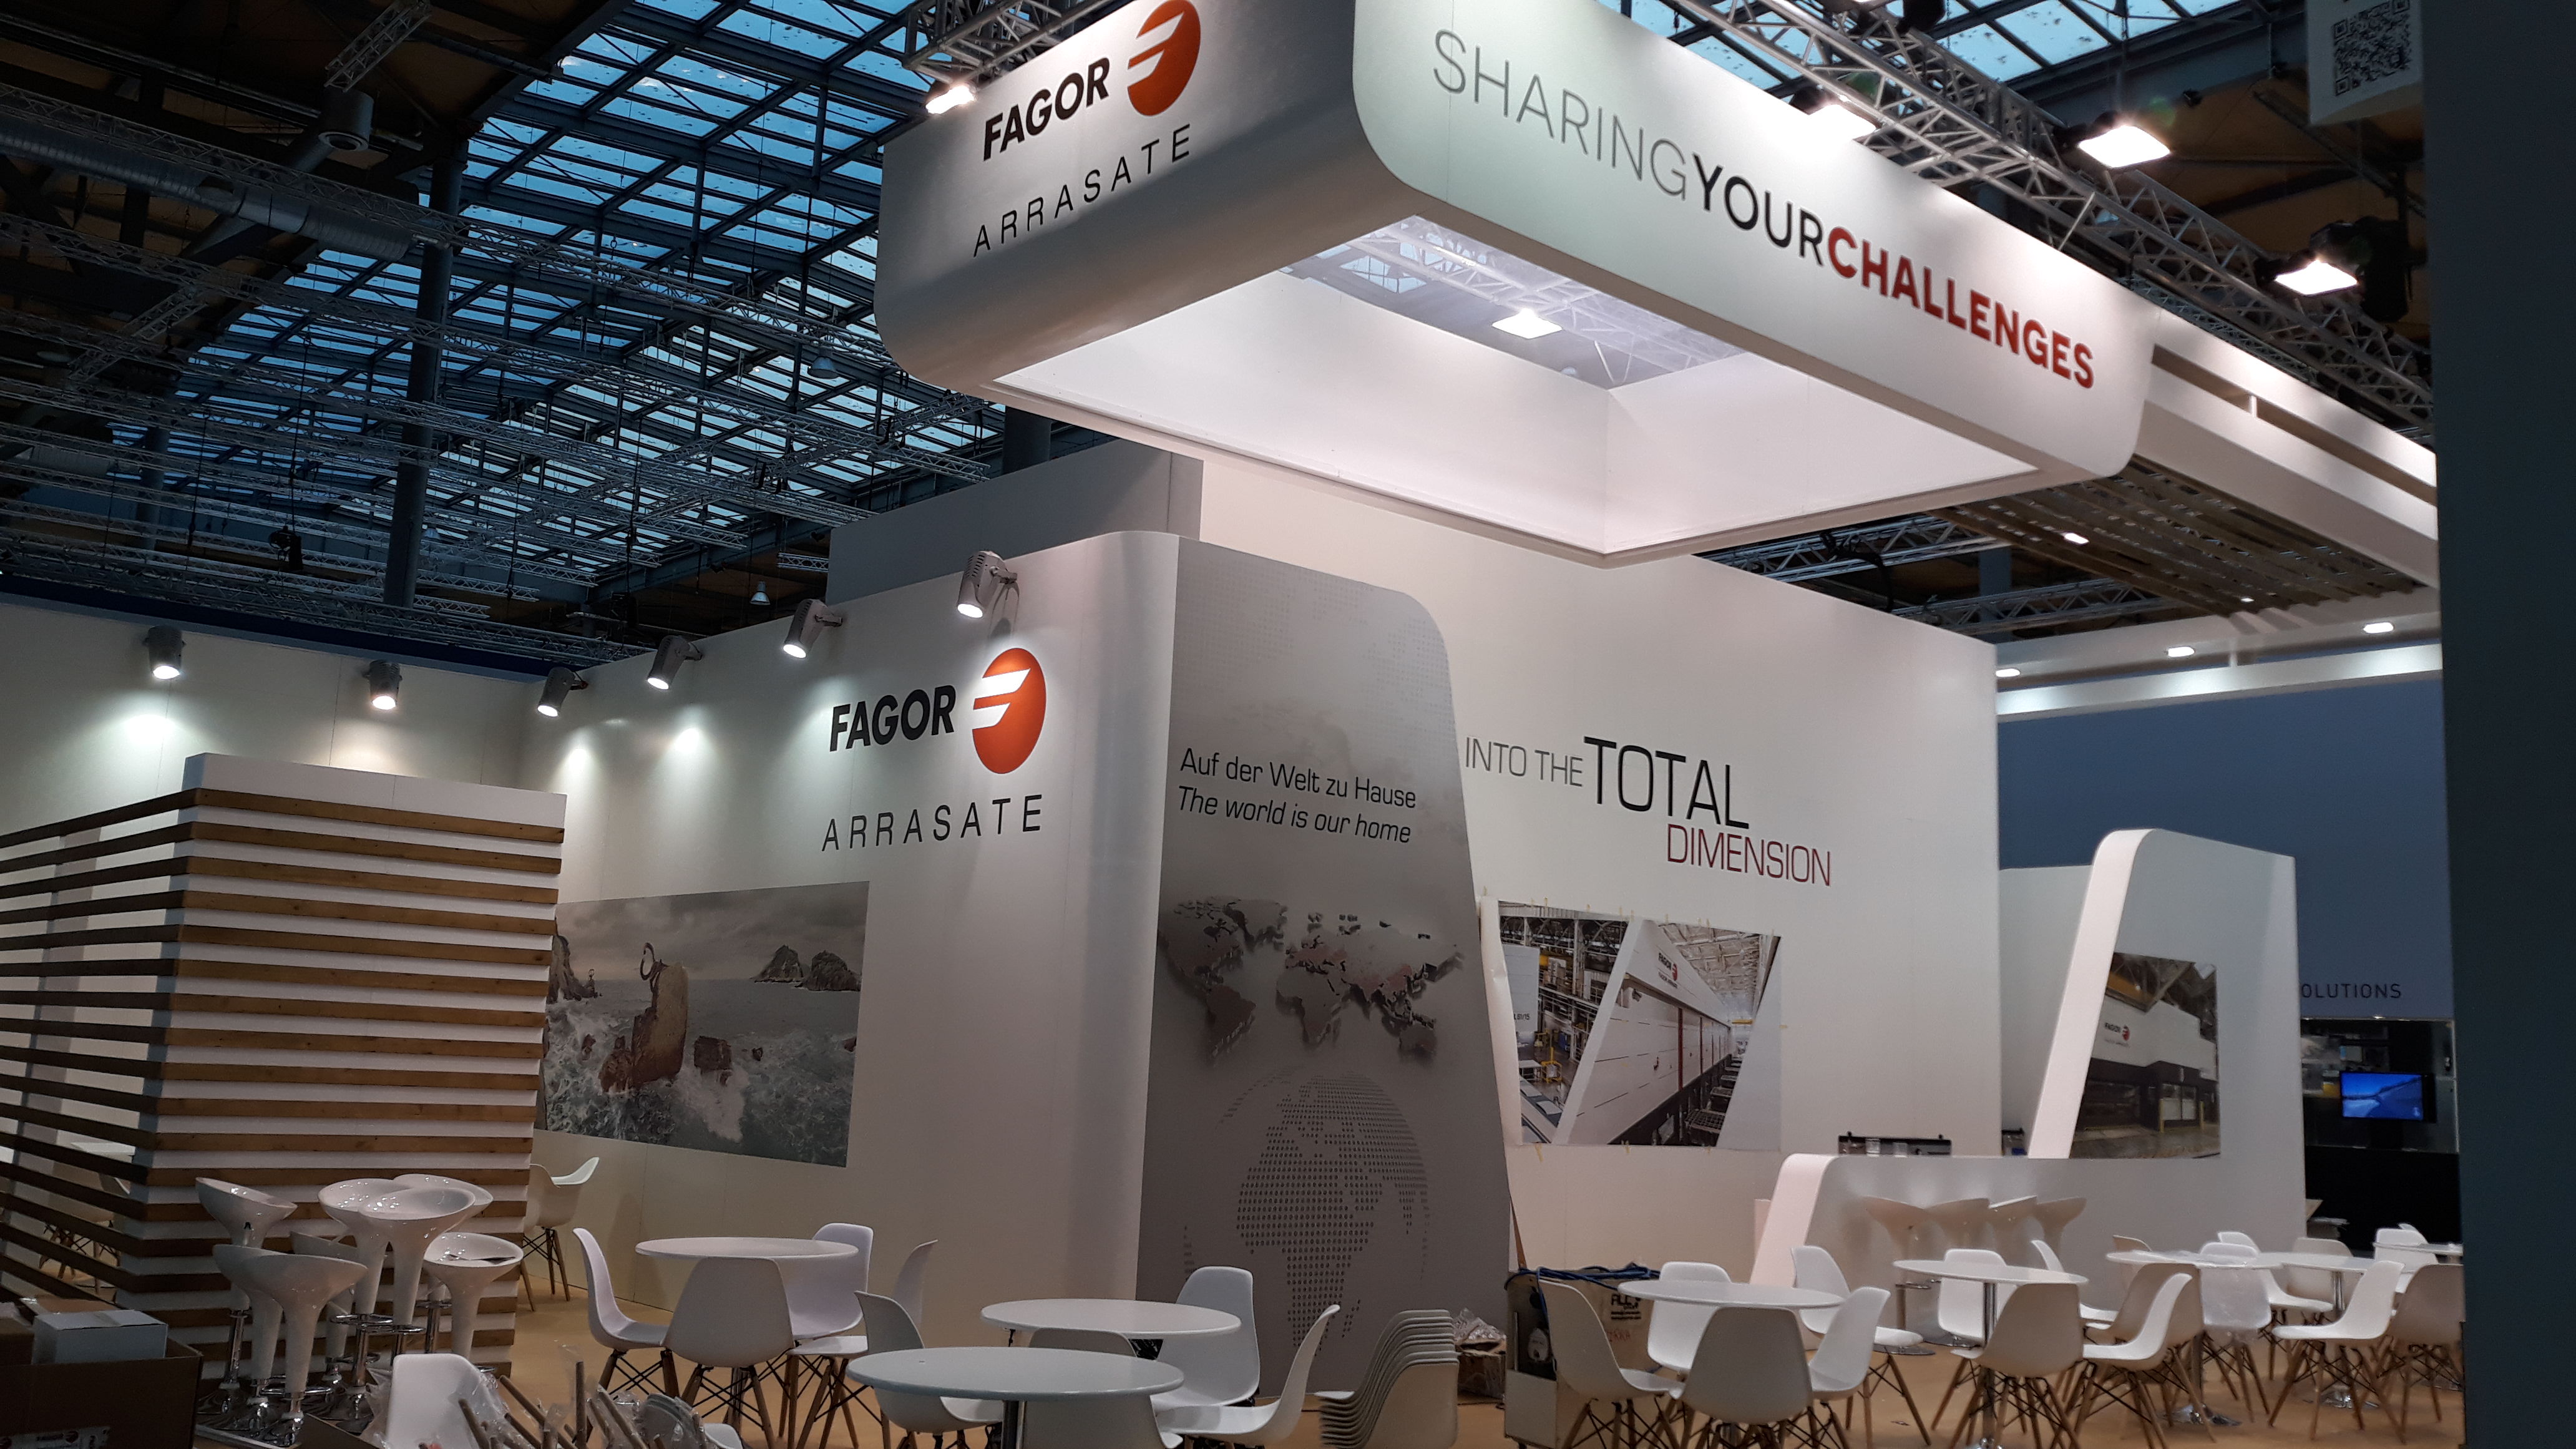 At EuroBlech, FAGOR ARRASATE presented its high productivity and energy-saving solutions for the automotive and metal processing sectors